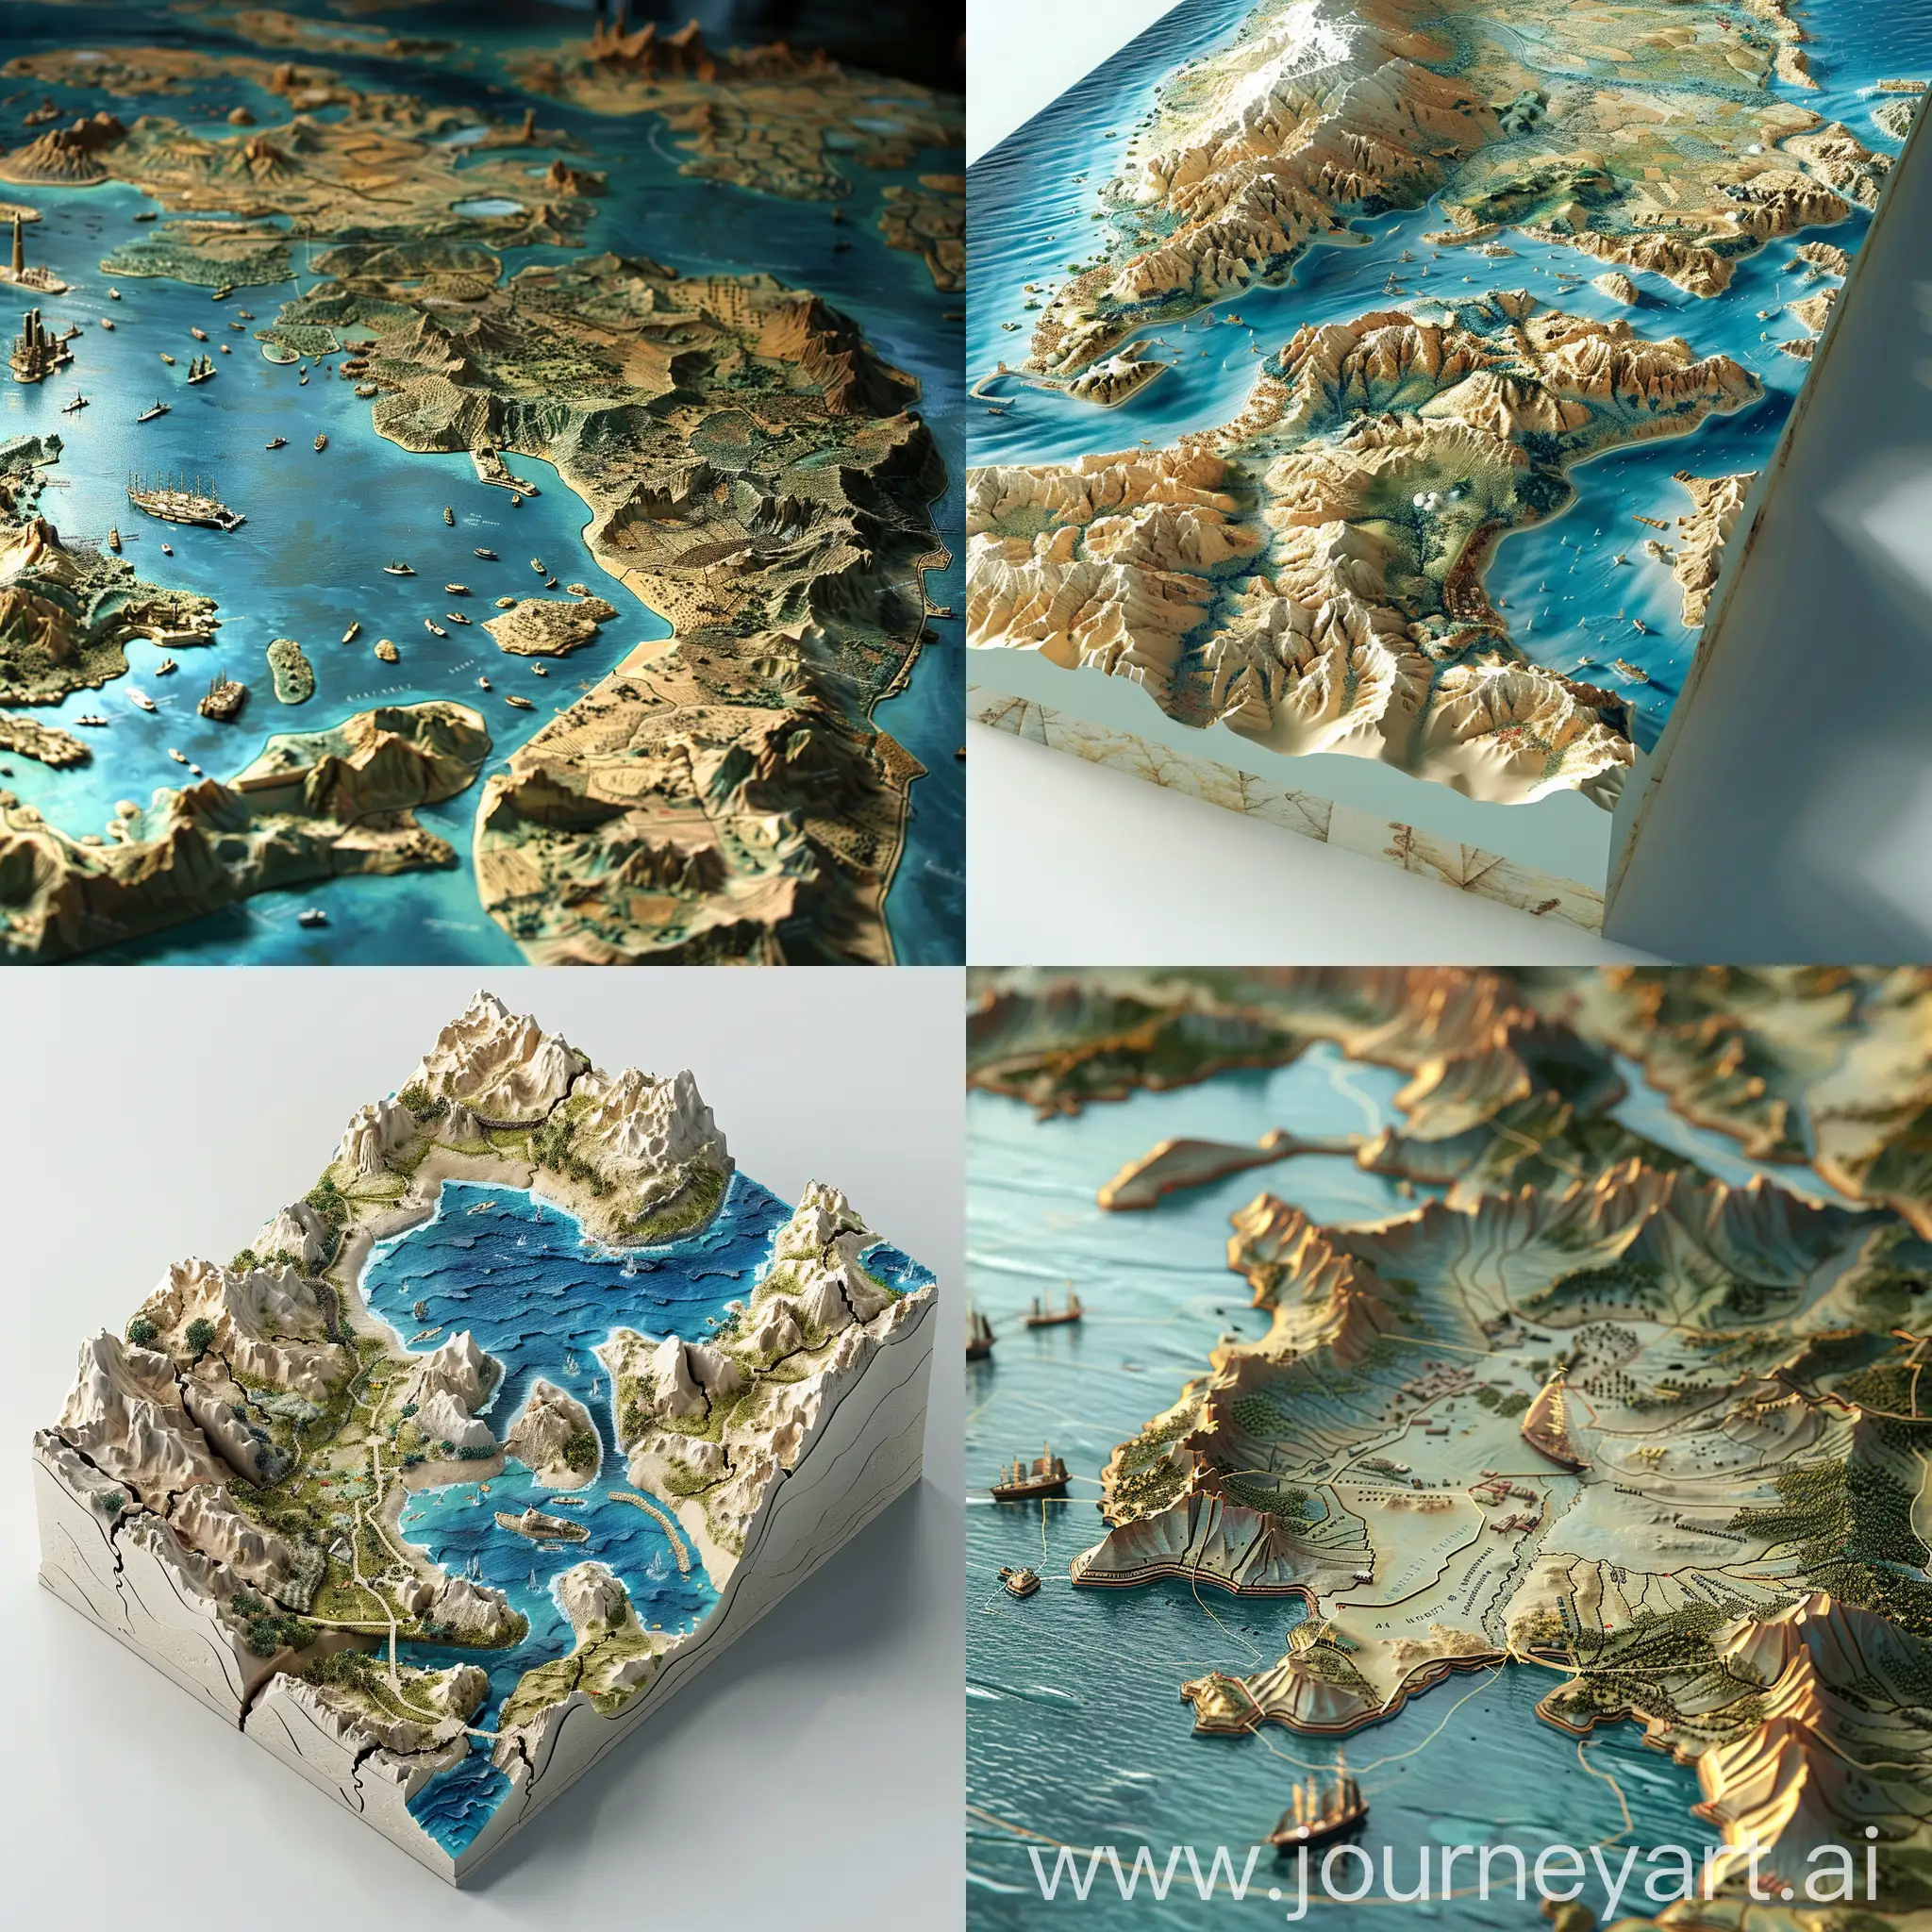 It is a three-dimensional map that shows the sea and the land from above